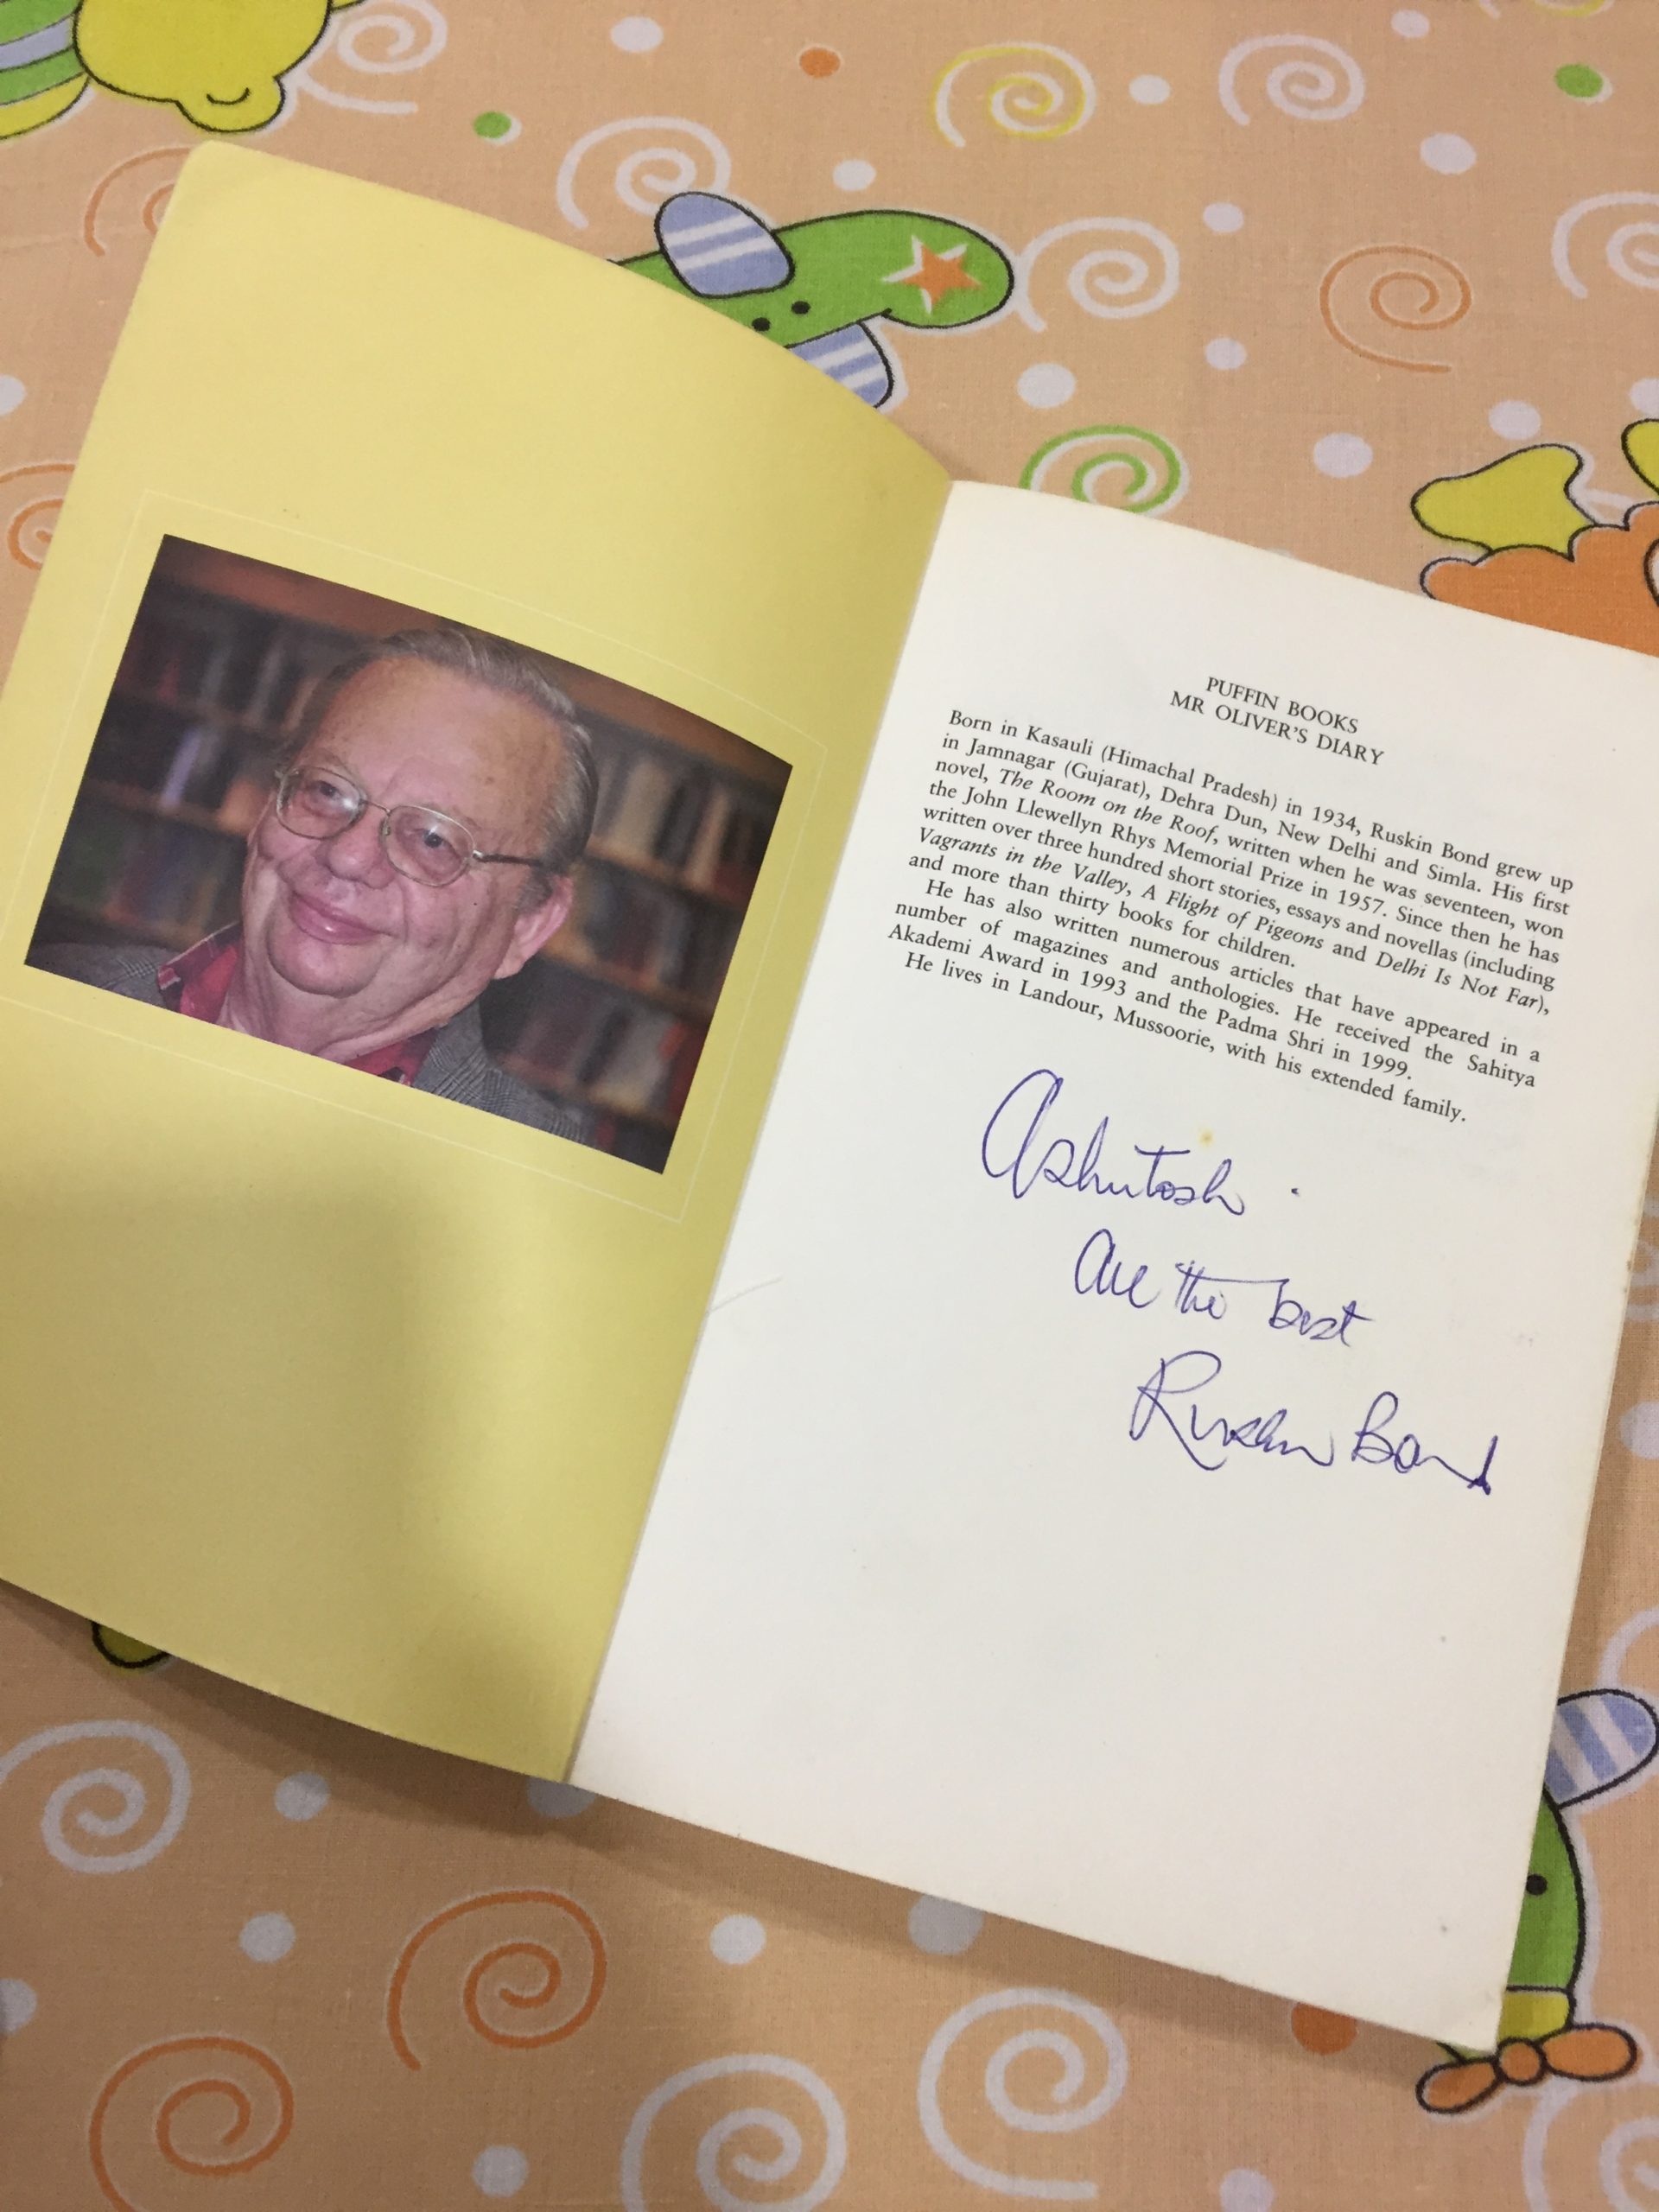 A picture of the book Mr Oliver's Diary, signed by Ruskin bond himself